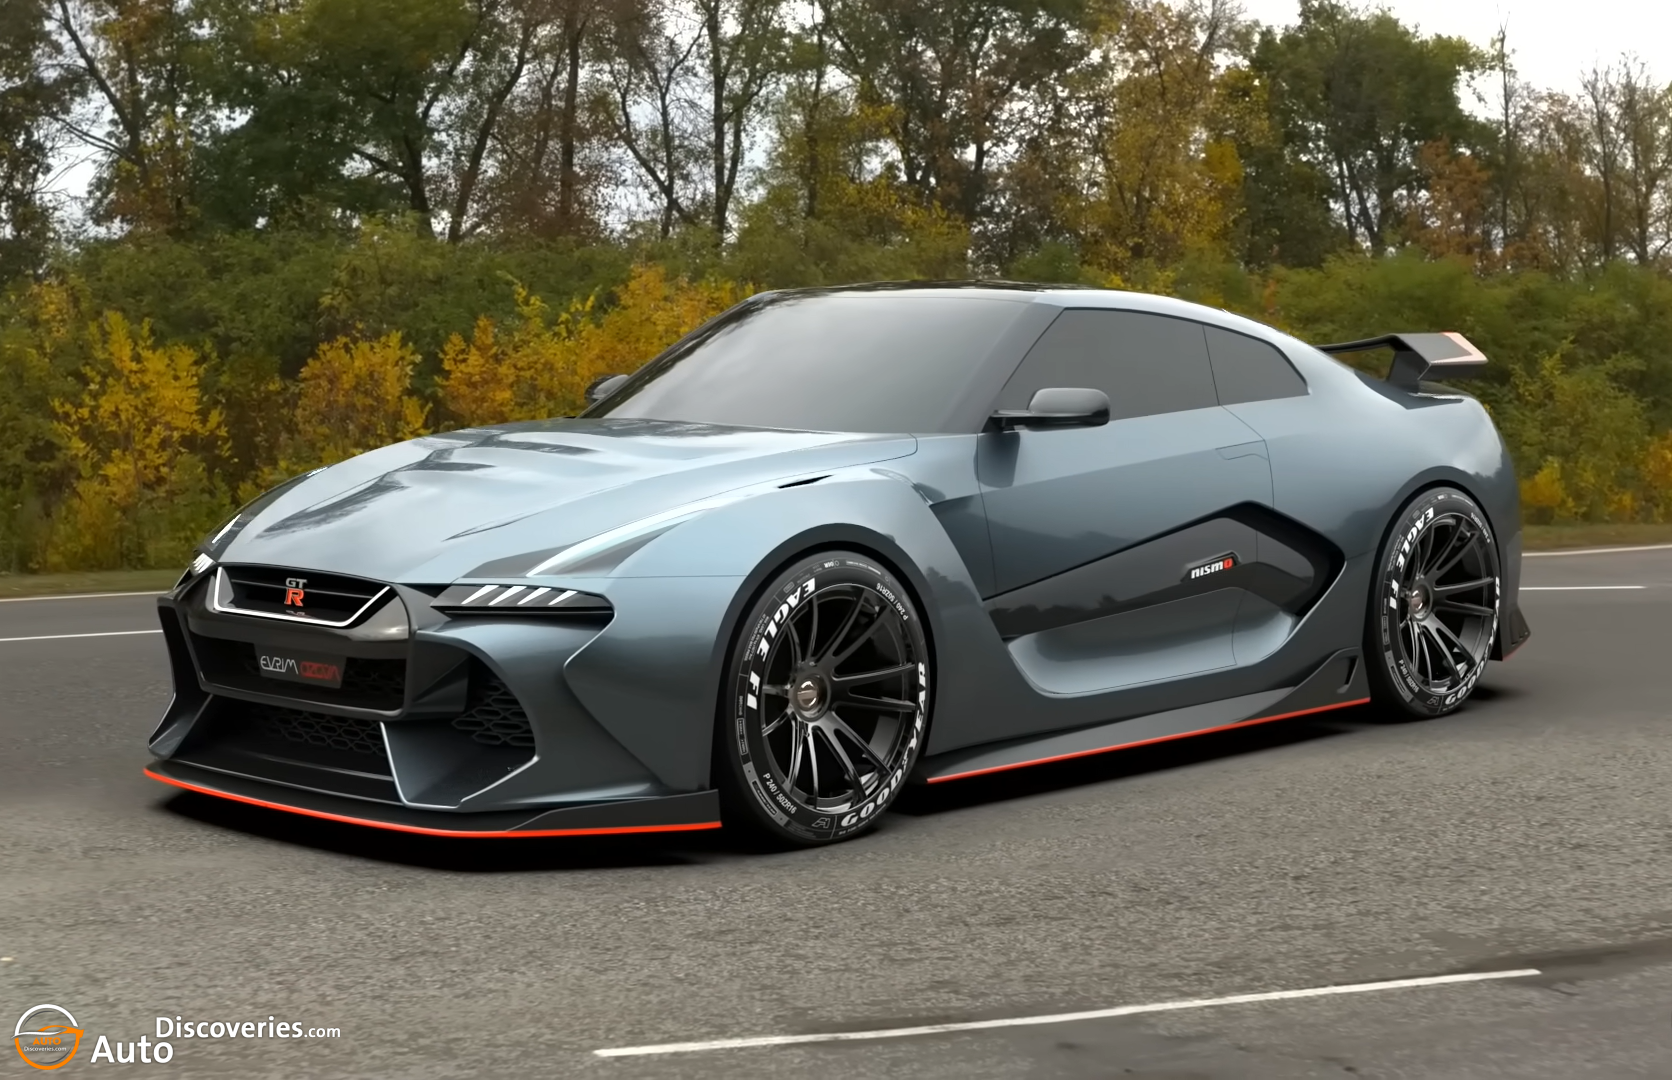 New Nissan GTR R36 Nismo, comments on your own #gtrr36 #gtr #r35